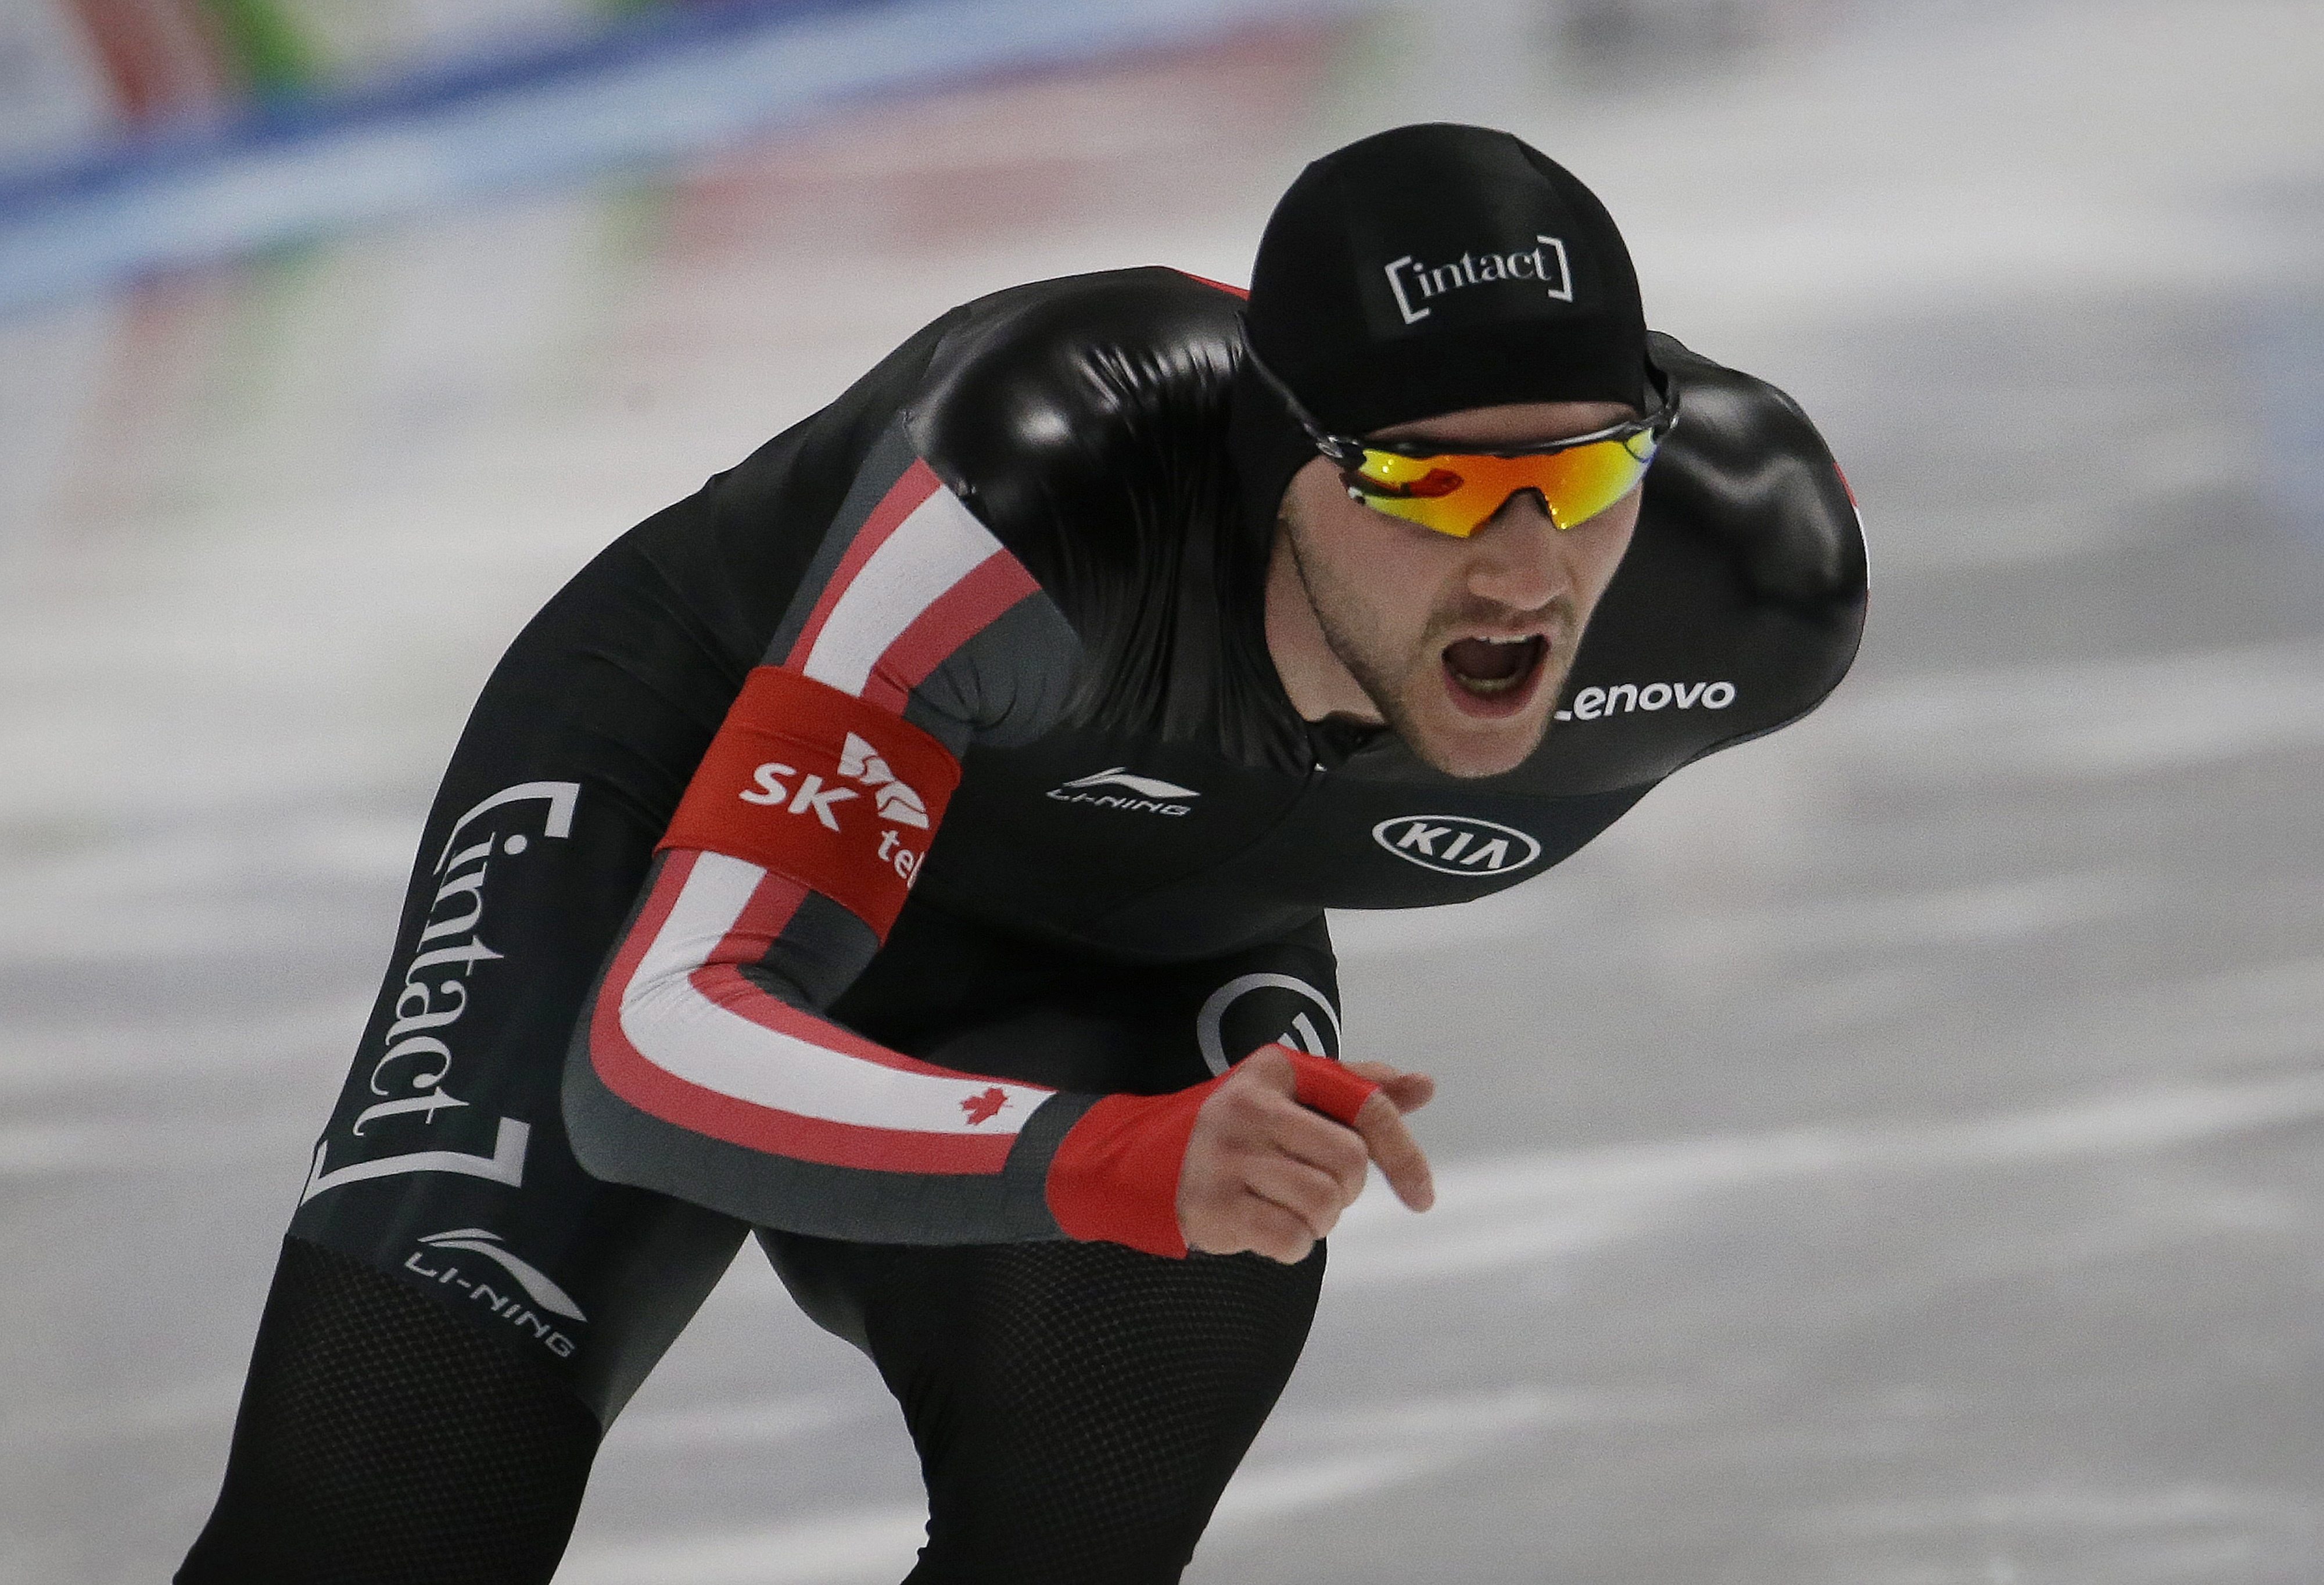 Second placed Vincent De Haitre of Canada competes during the men's 1000 meter race of the ISU world single distances speed skating championships at Gangneung Oval in Gangneung, South Korea, Saturday, Feb. 11, 2017. The world cup competition is also a test event for the upcoming Pyeongchang 2018 Winter Olympics. (AP Photo/Ahn Young-joon)